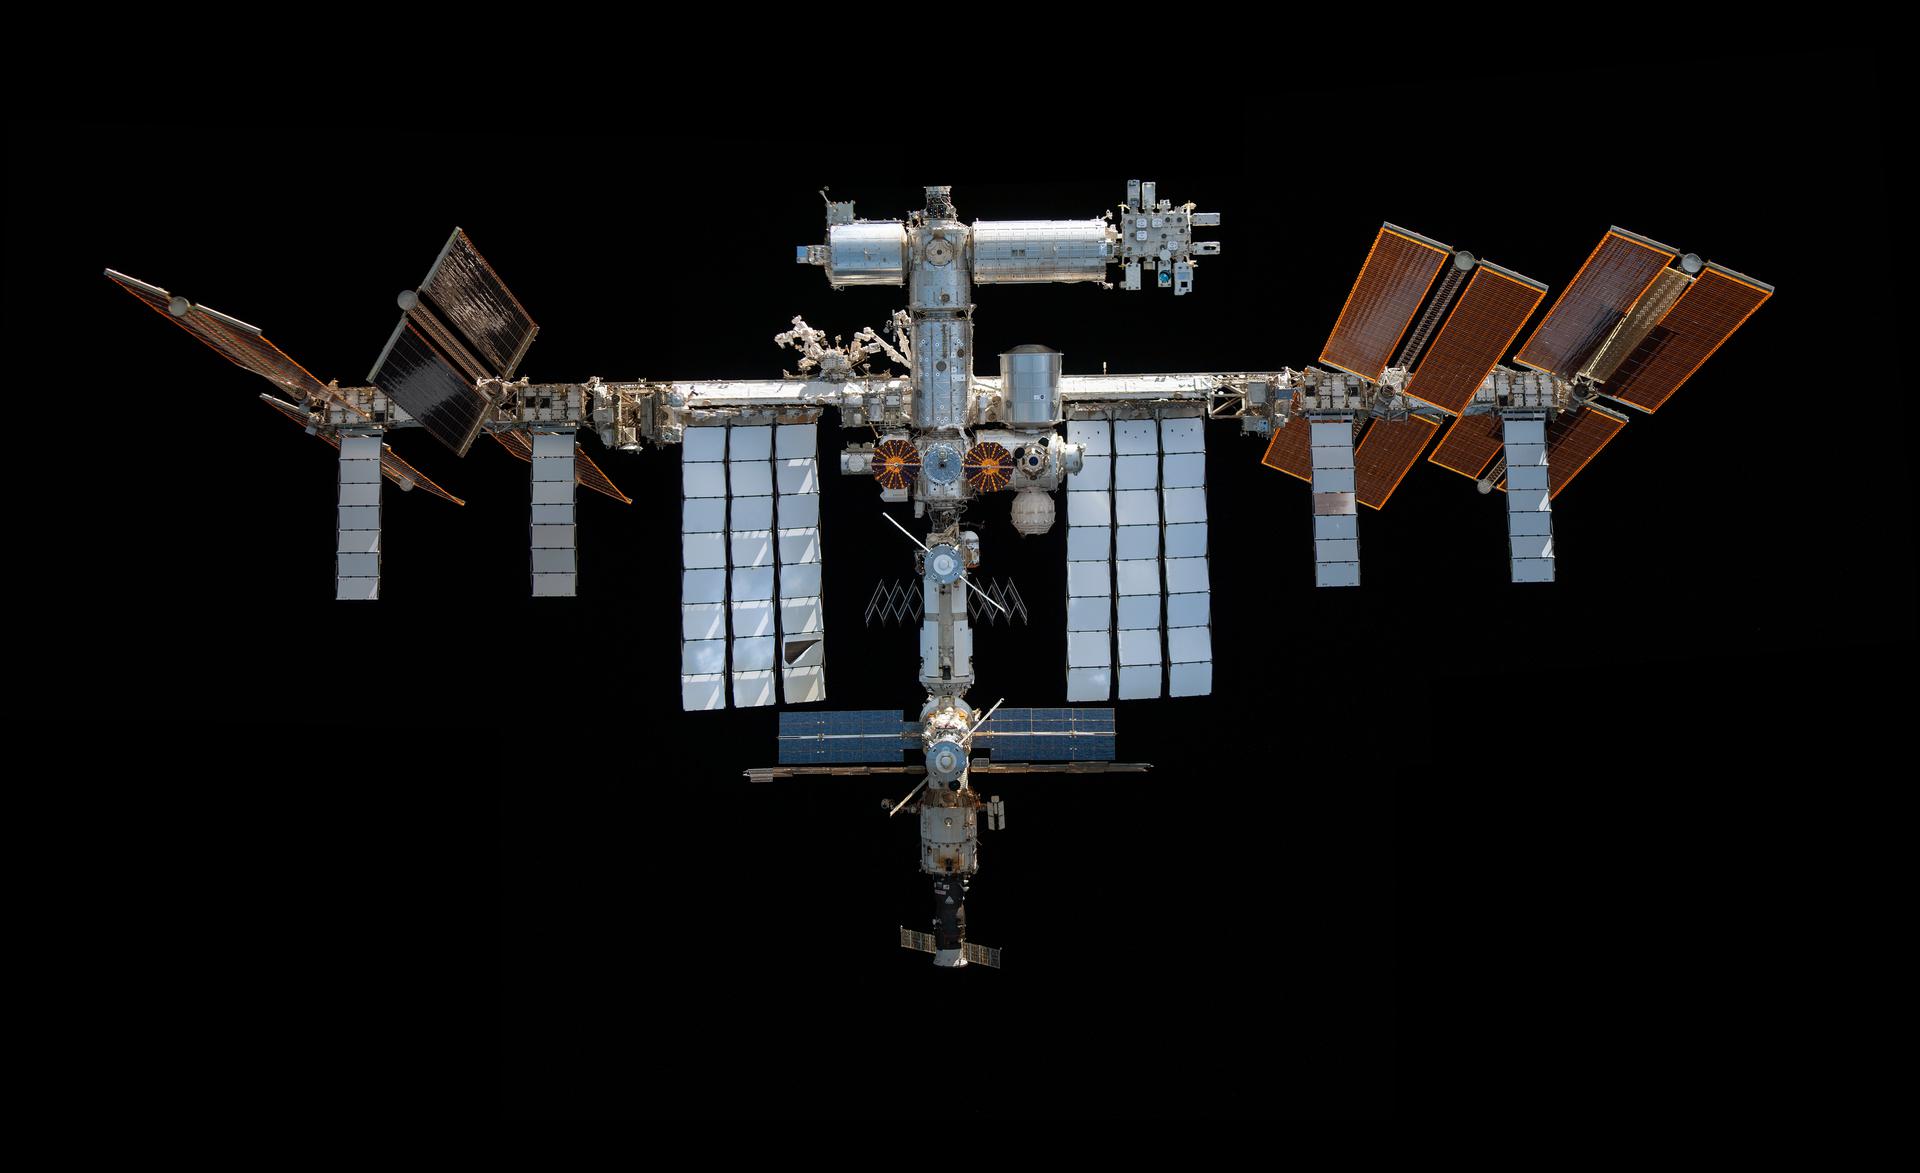 This mosaic depicts the International Space Station pictured from the SpaceX Crew Dragon Endeavour during a fly around of the orbiting lab.